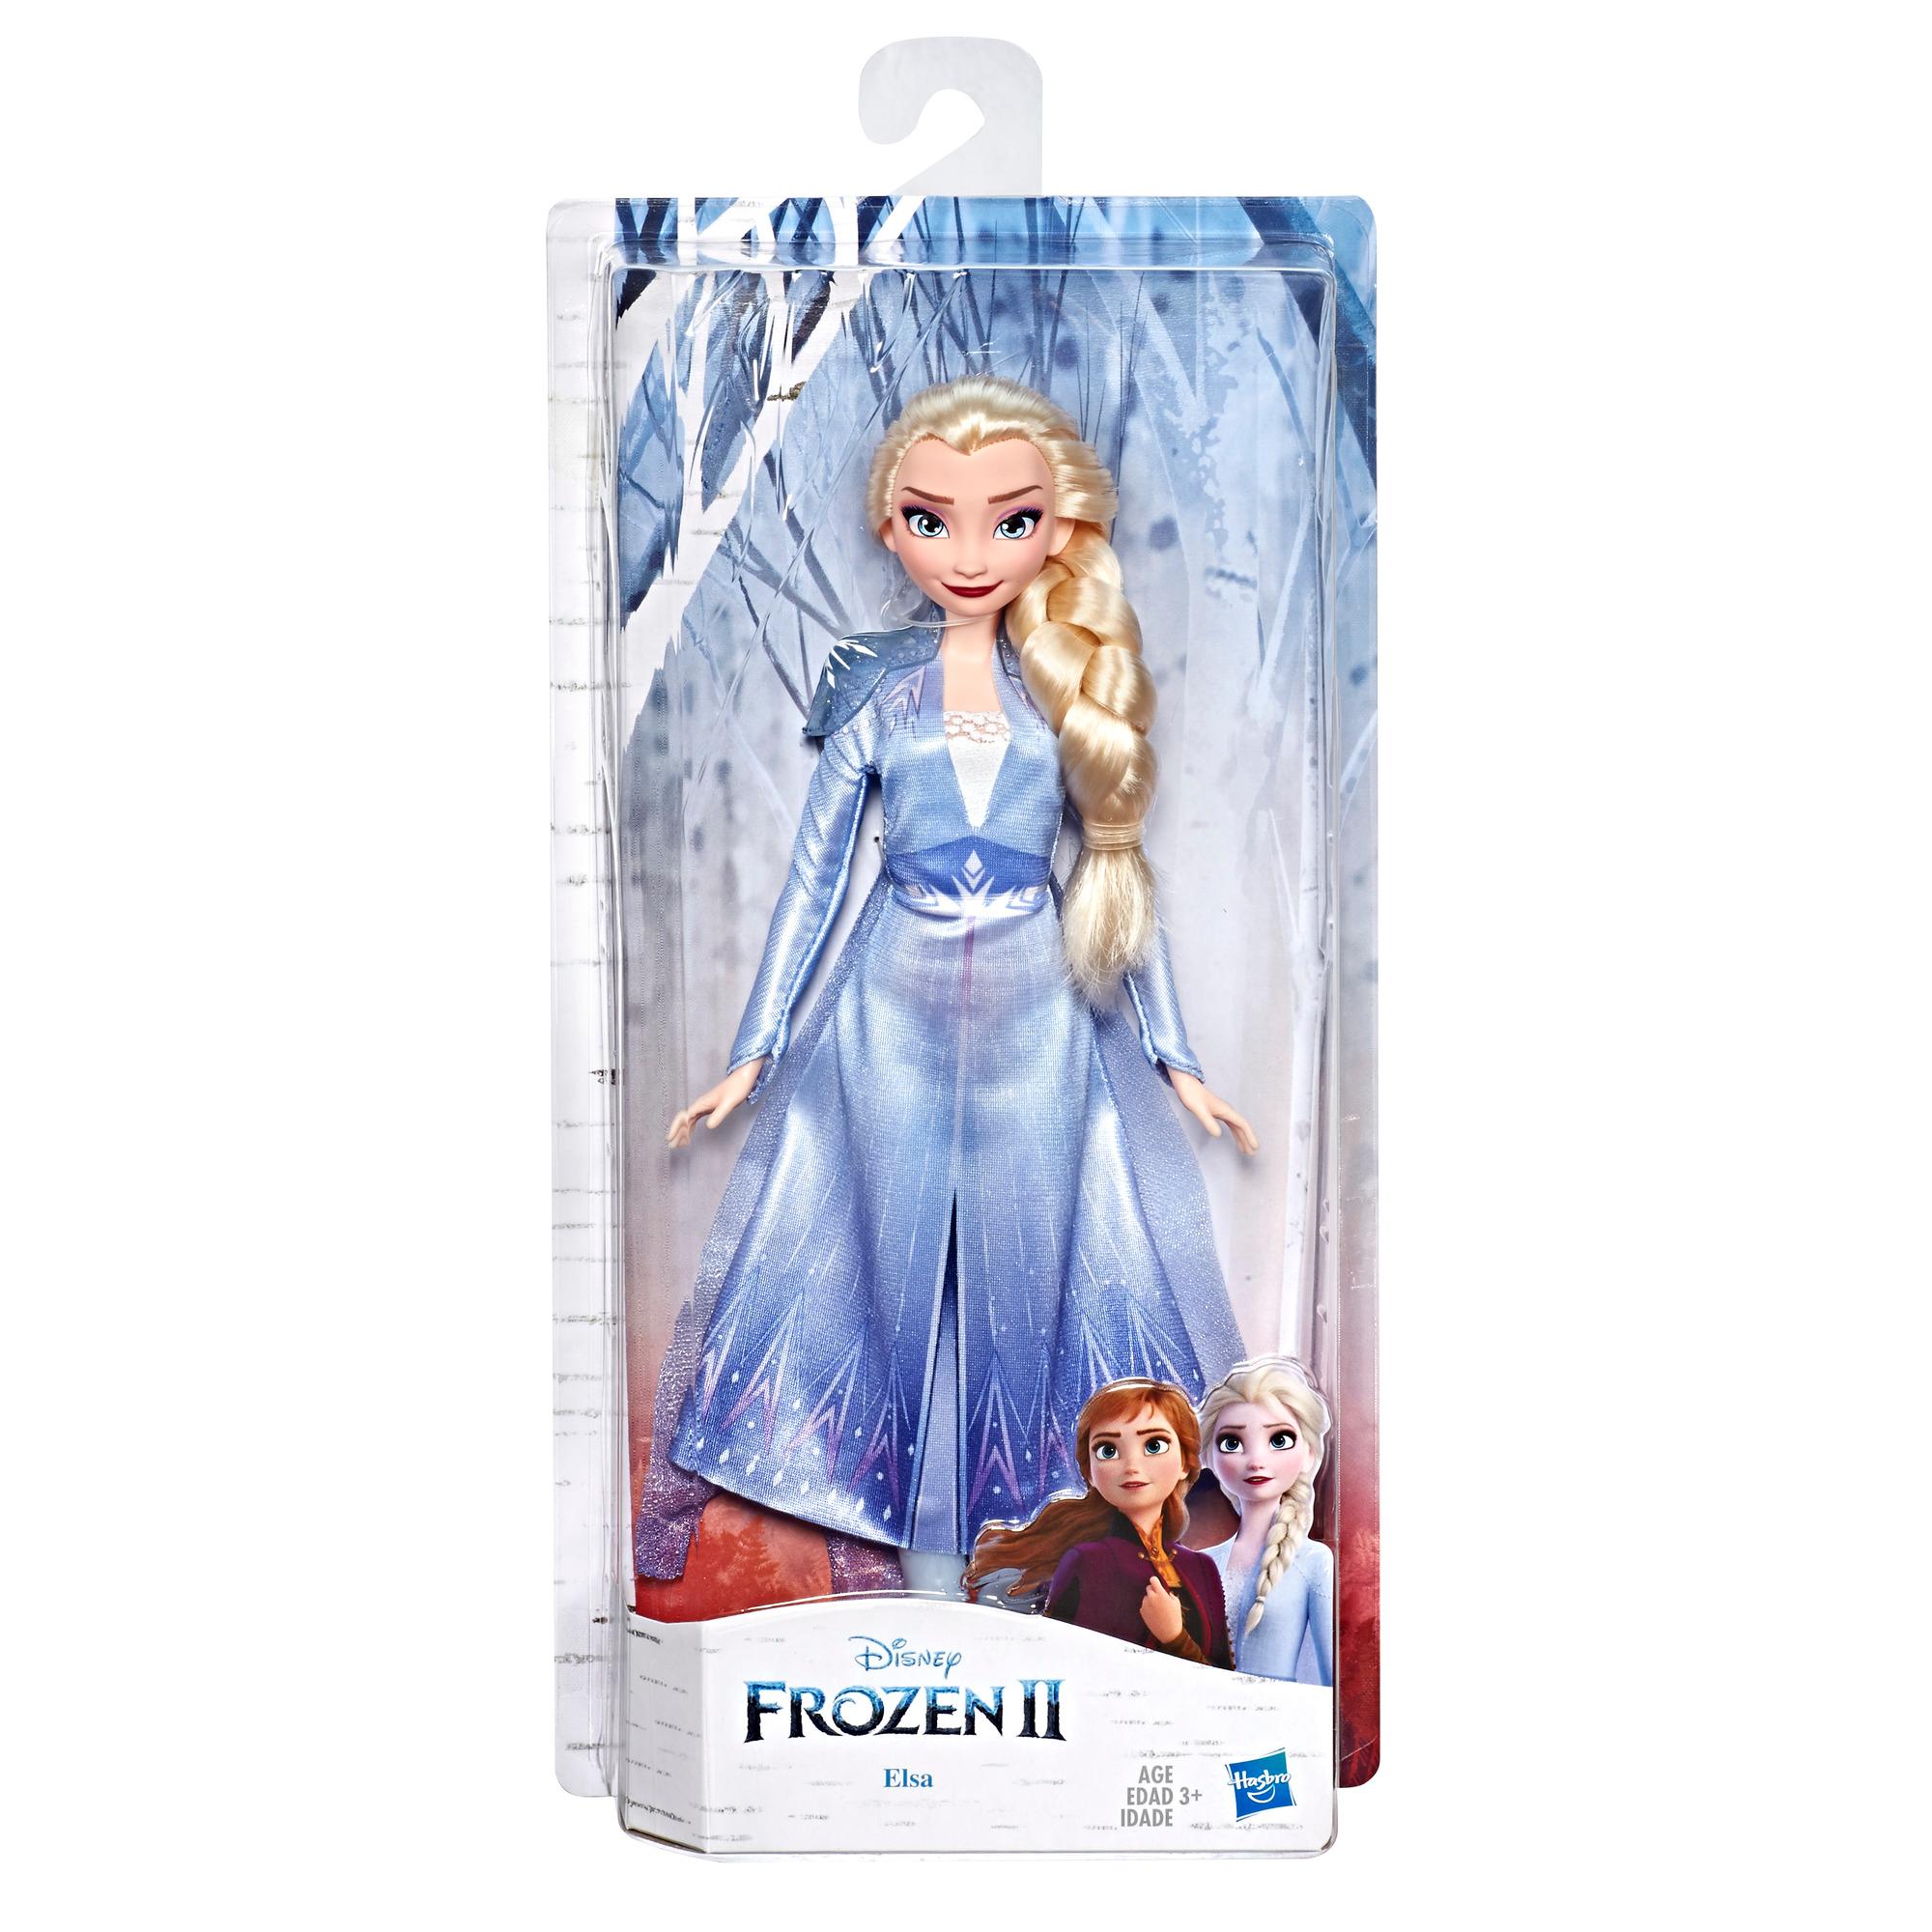 Disney Frozen Elsa Fashion Doll With Long Hair and Blue Outfit Inspired by Frozen 2 | Frozen